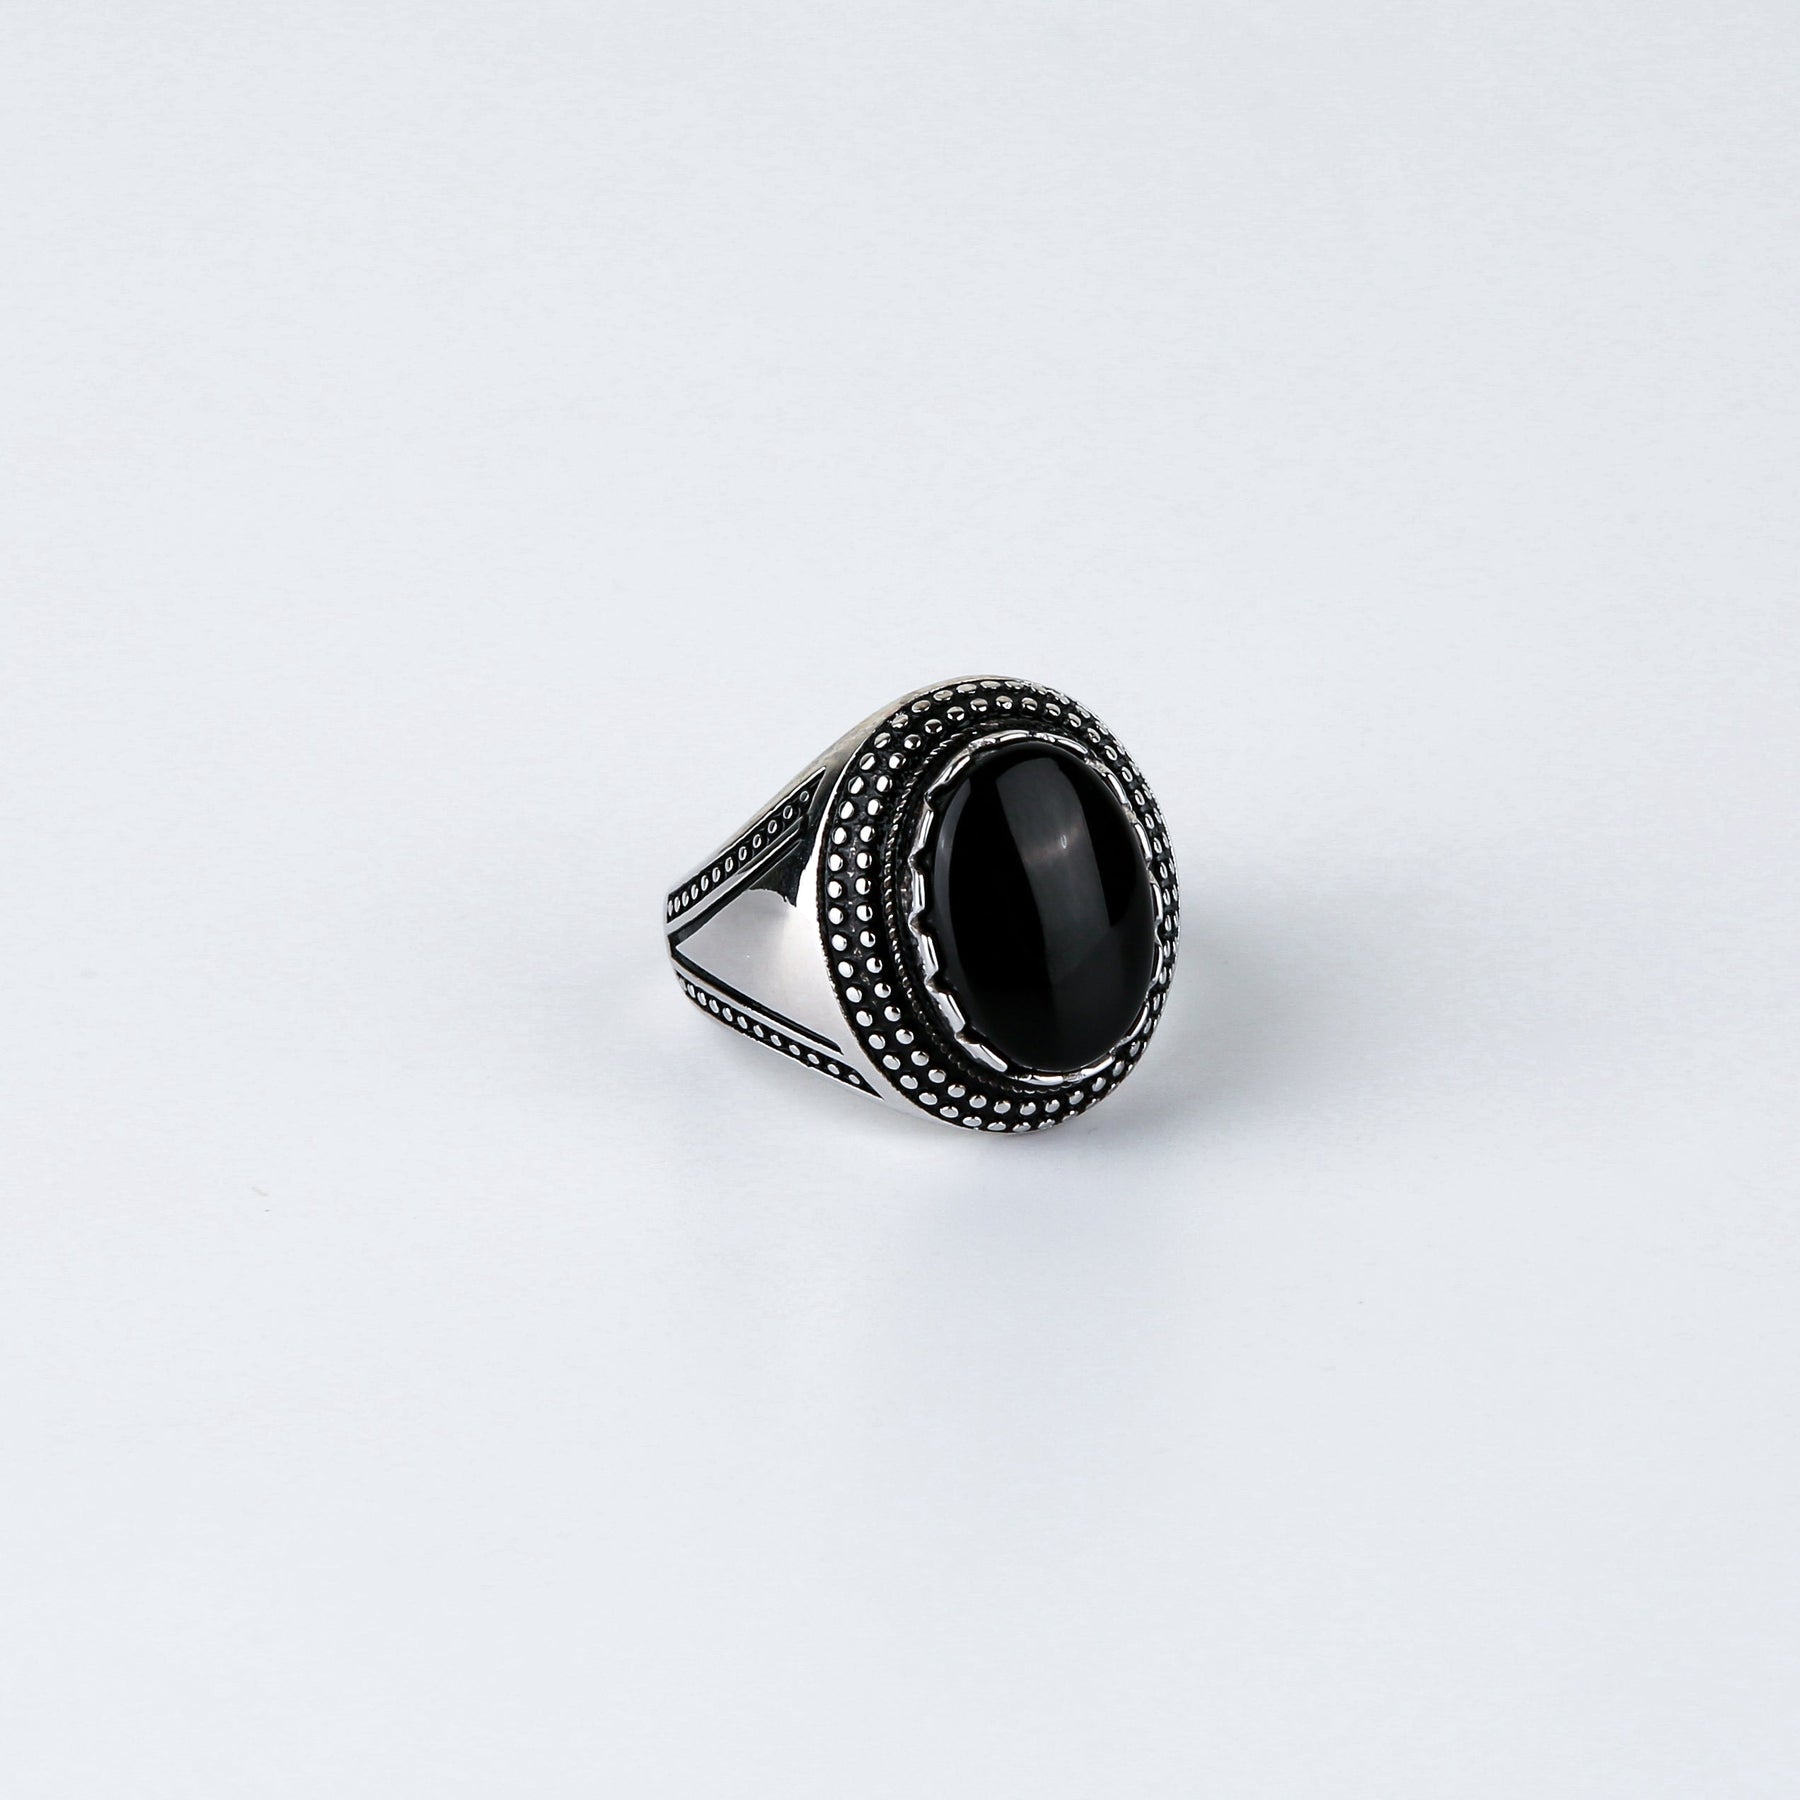 Buy Black Onyx Ring 925 Sterling Silver Band Ring Online in India - Etsy | Black  onyx ring, Sterling silver rings bands, Solid silver jewelry